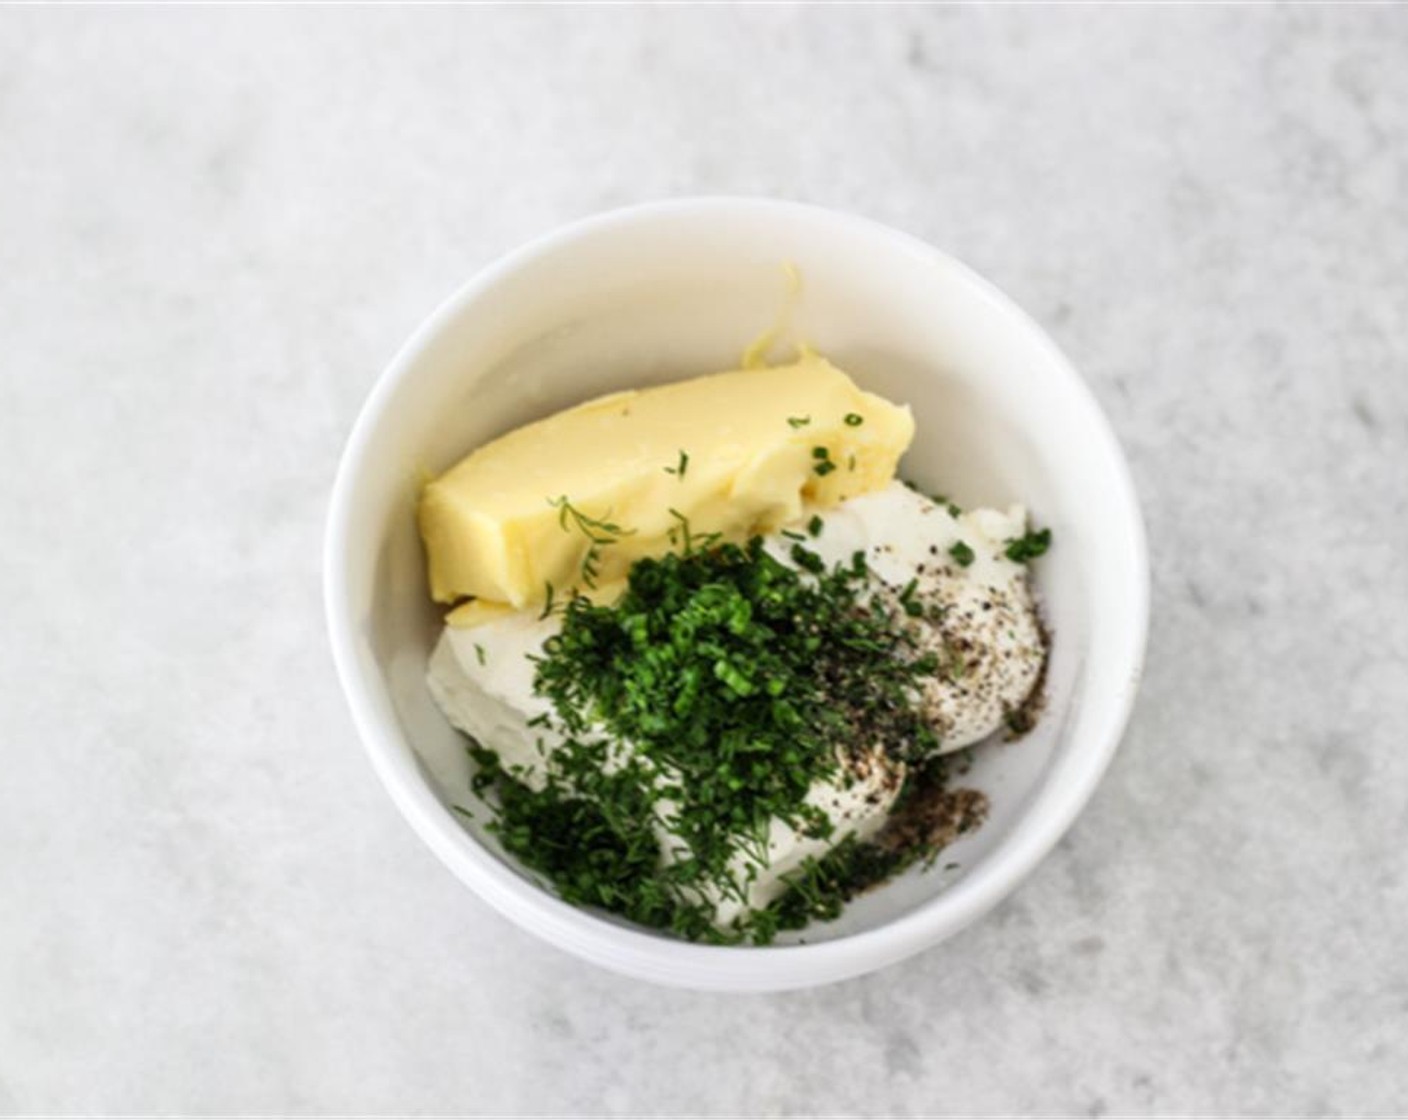 step 1 In a medium bowl, combine the Cream Cheese (1/2 cup), Butter (2 Tbsp), Fresh Dill (1 tsp), Fresh Chives (1 tsp), Salt (to taste), Ground Black Pepper (to taste), and juice from Lemon (1). Mix to combine until smooth.